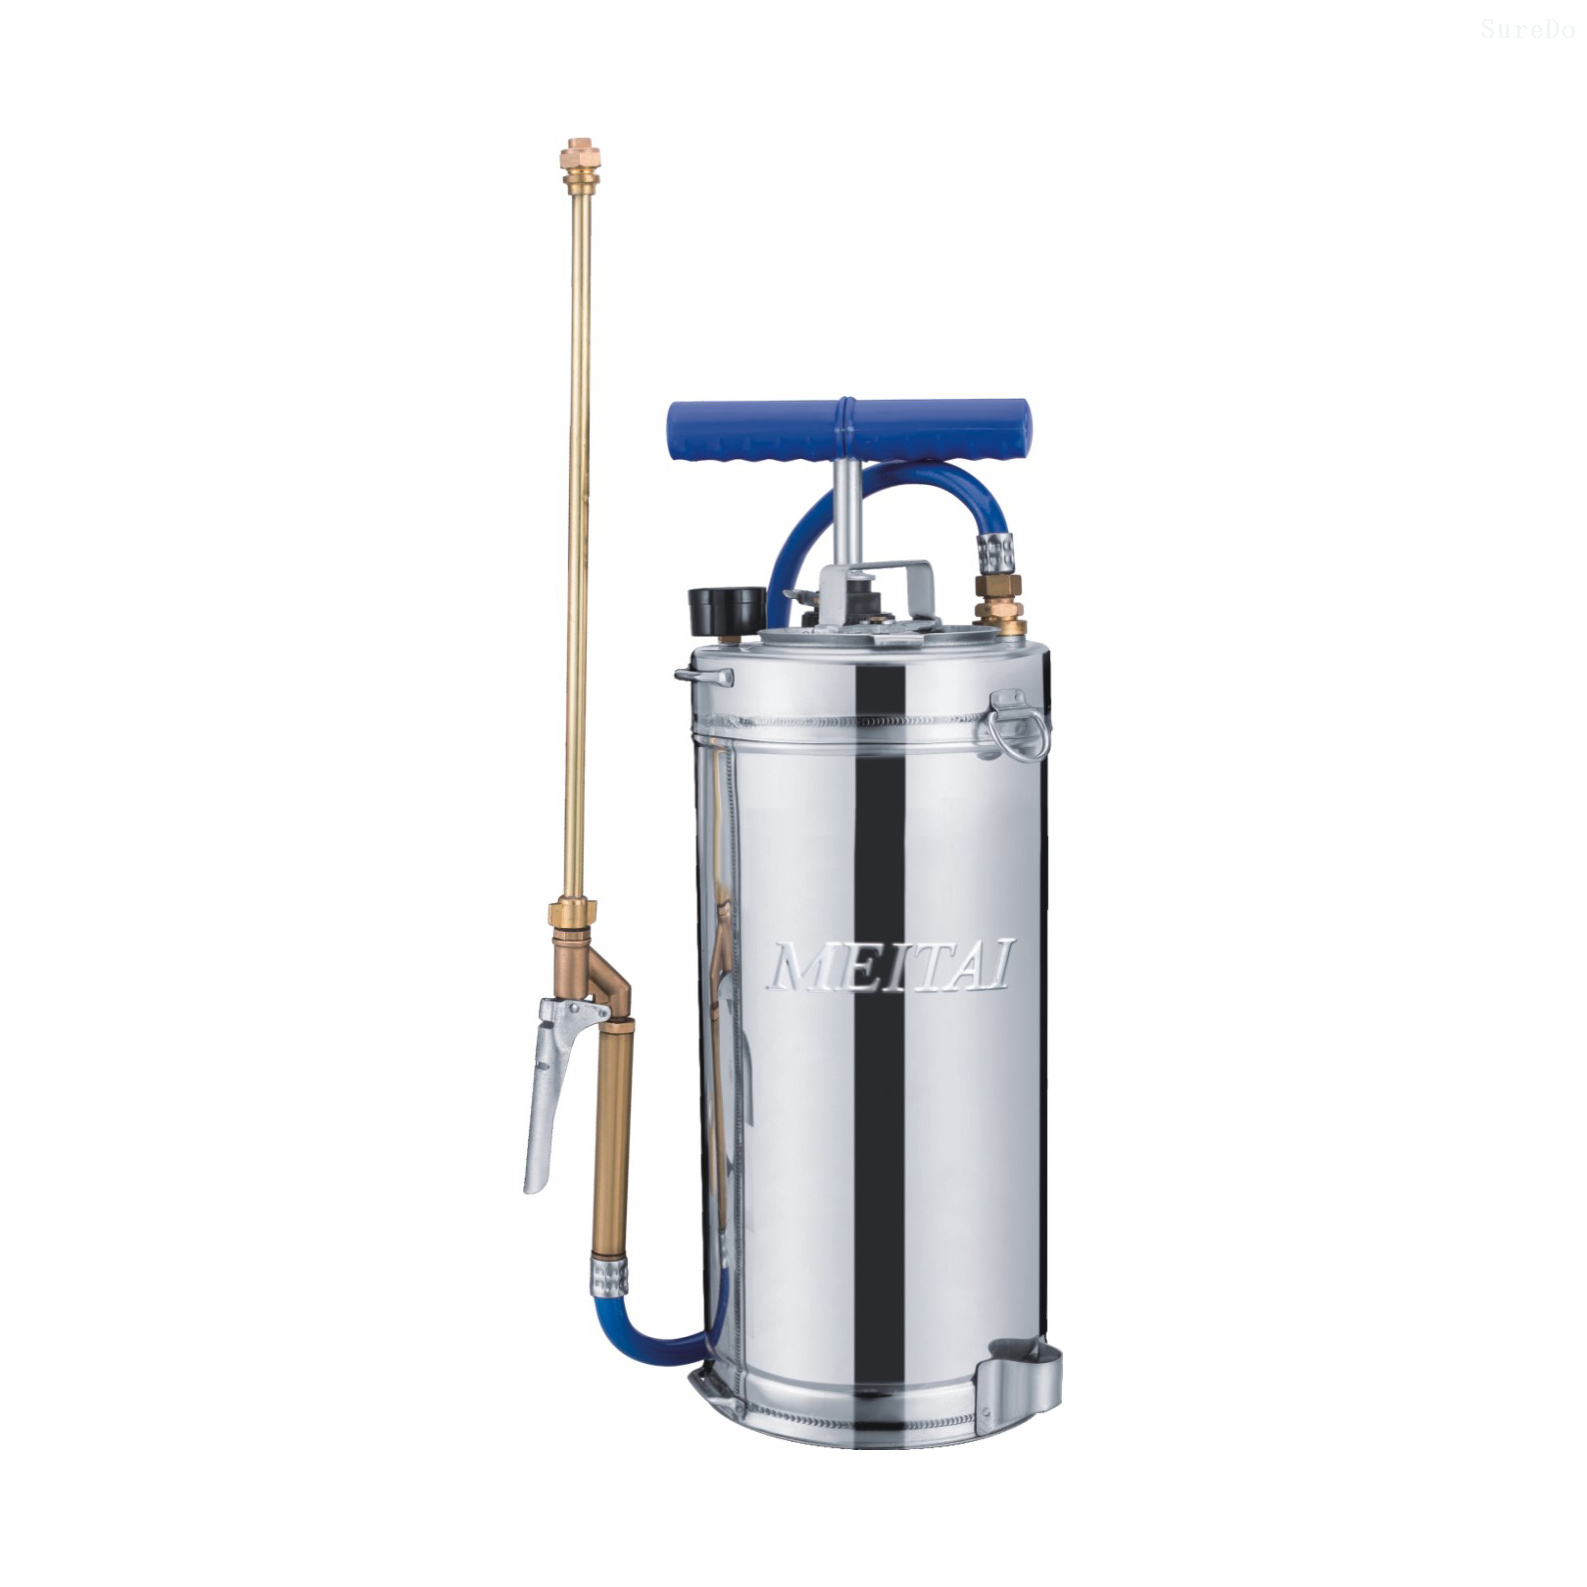 5-14 Liter Premier Stainless Steel Pesticide And Fertilizers Sprayer For Garden And Home